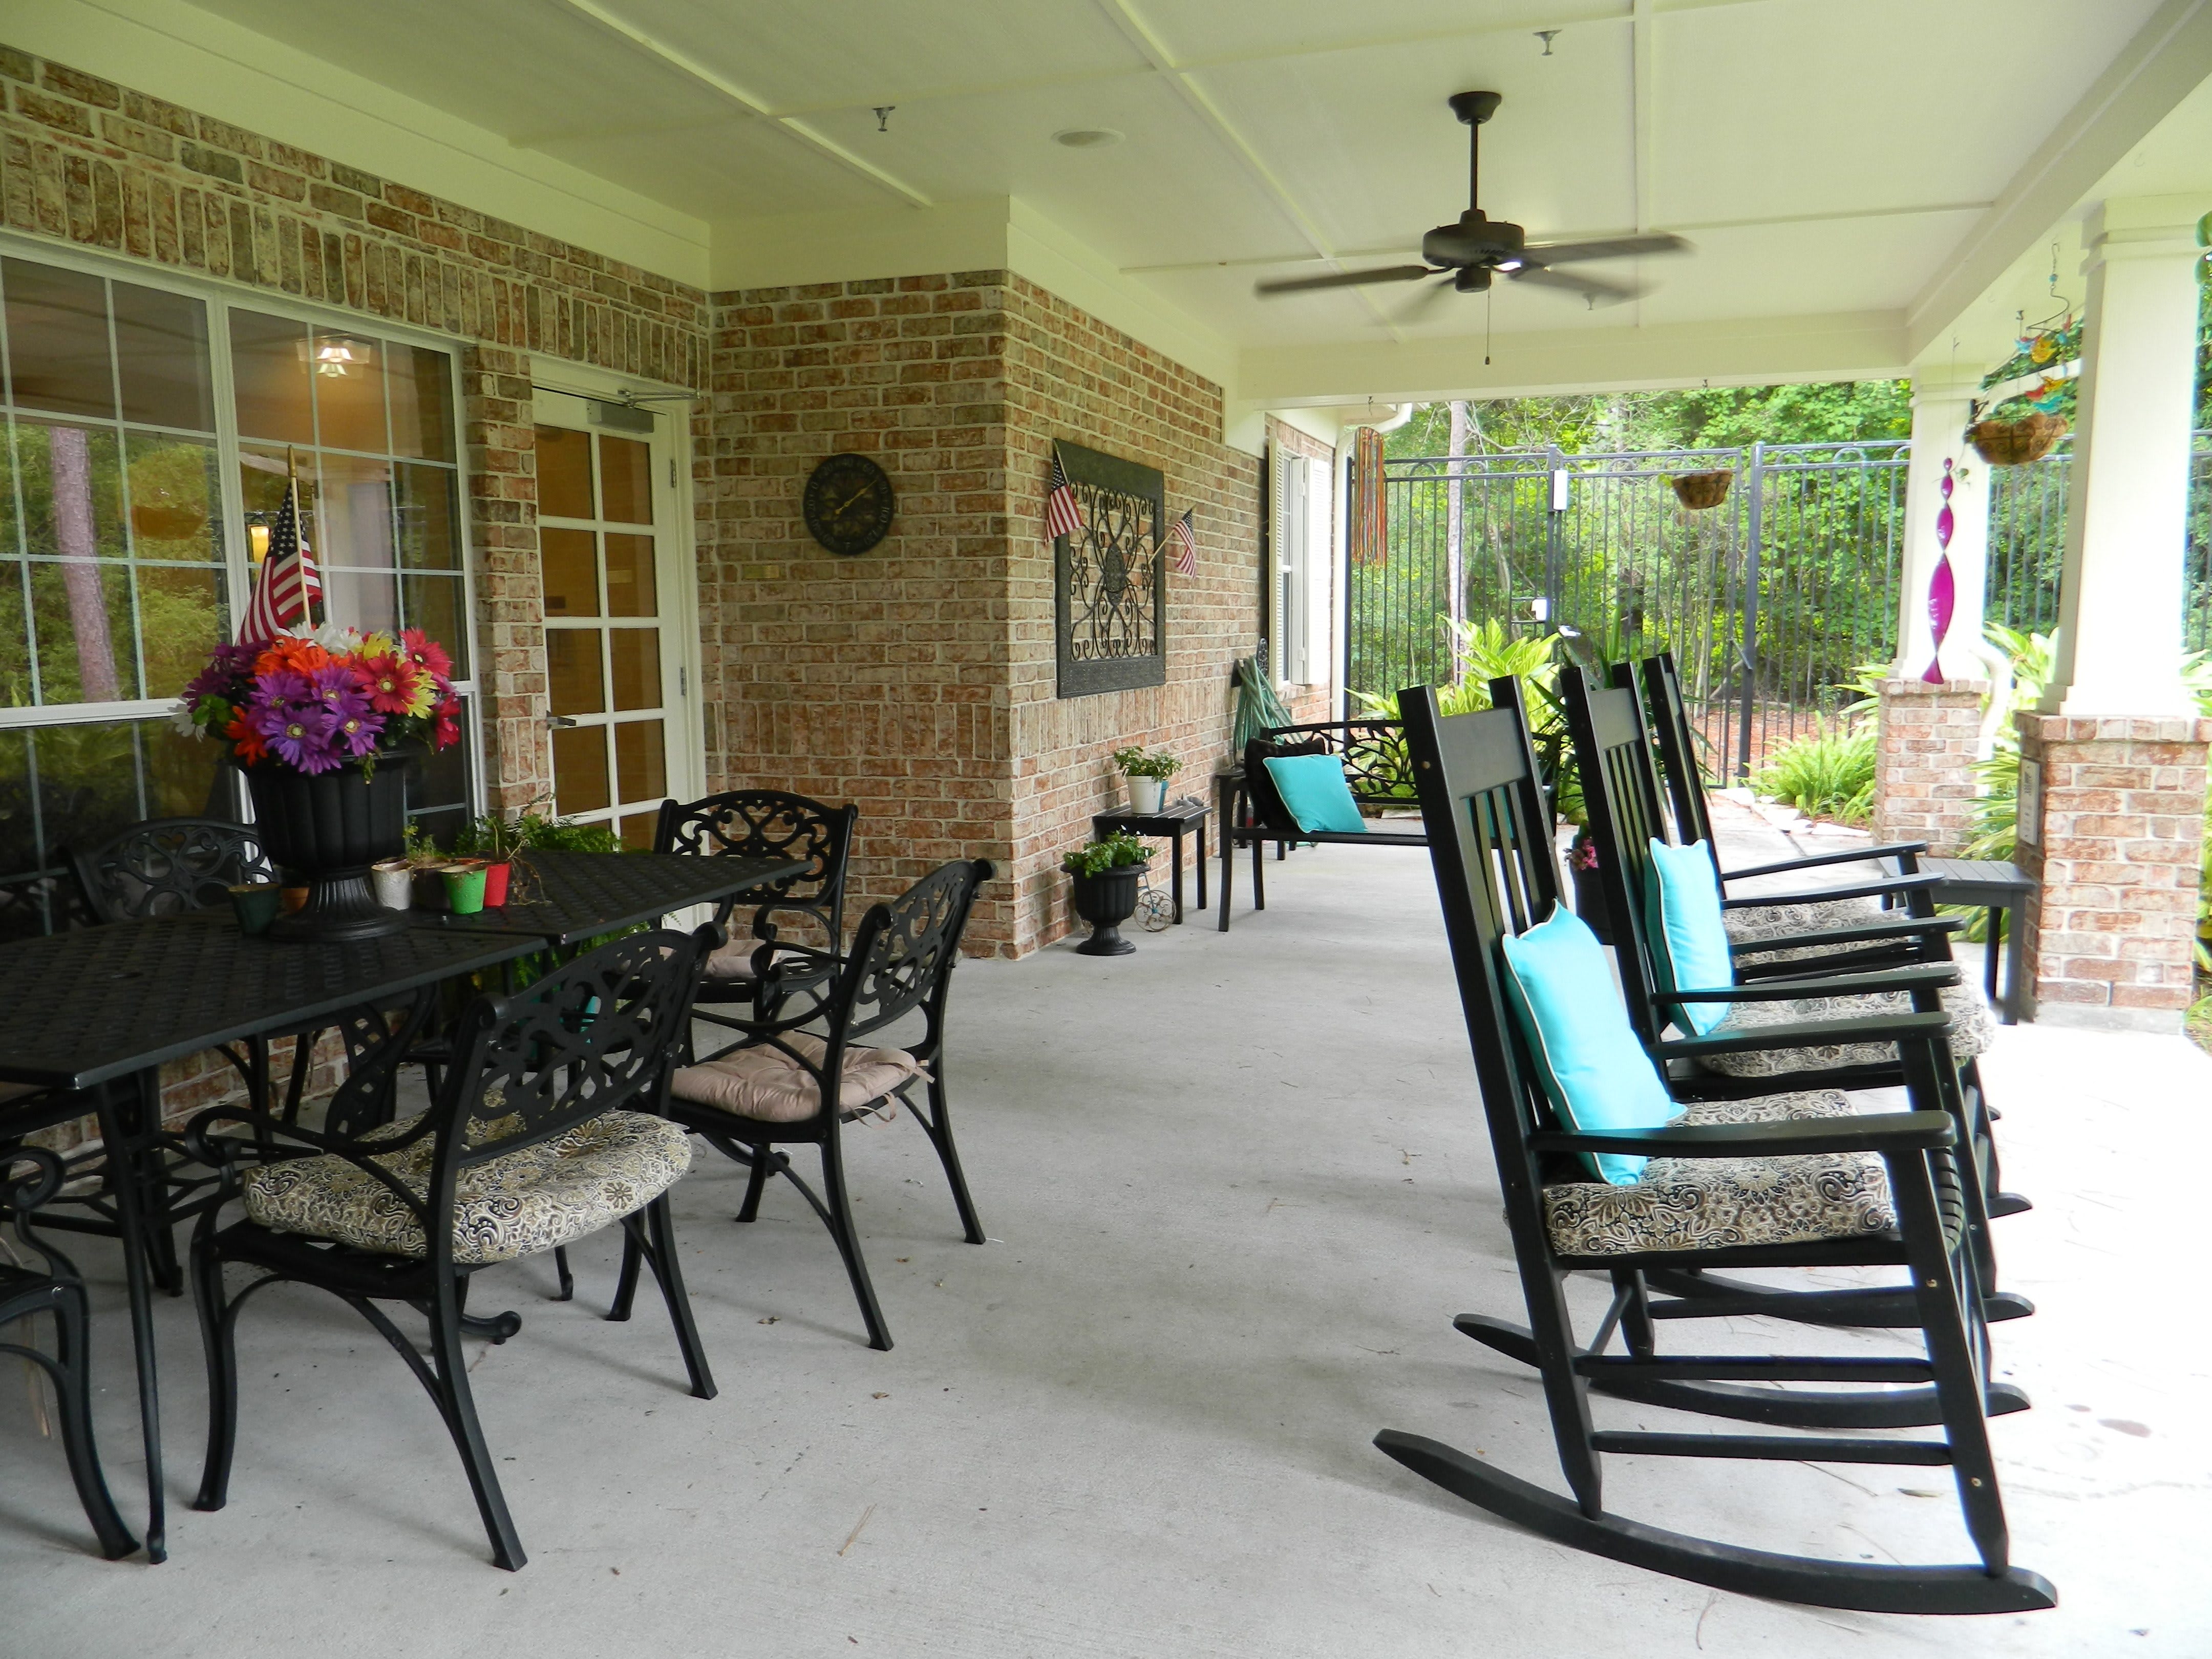 The Villas of SCR at The Woodlands outdoor common area